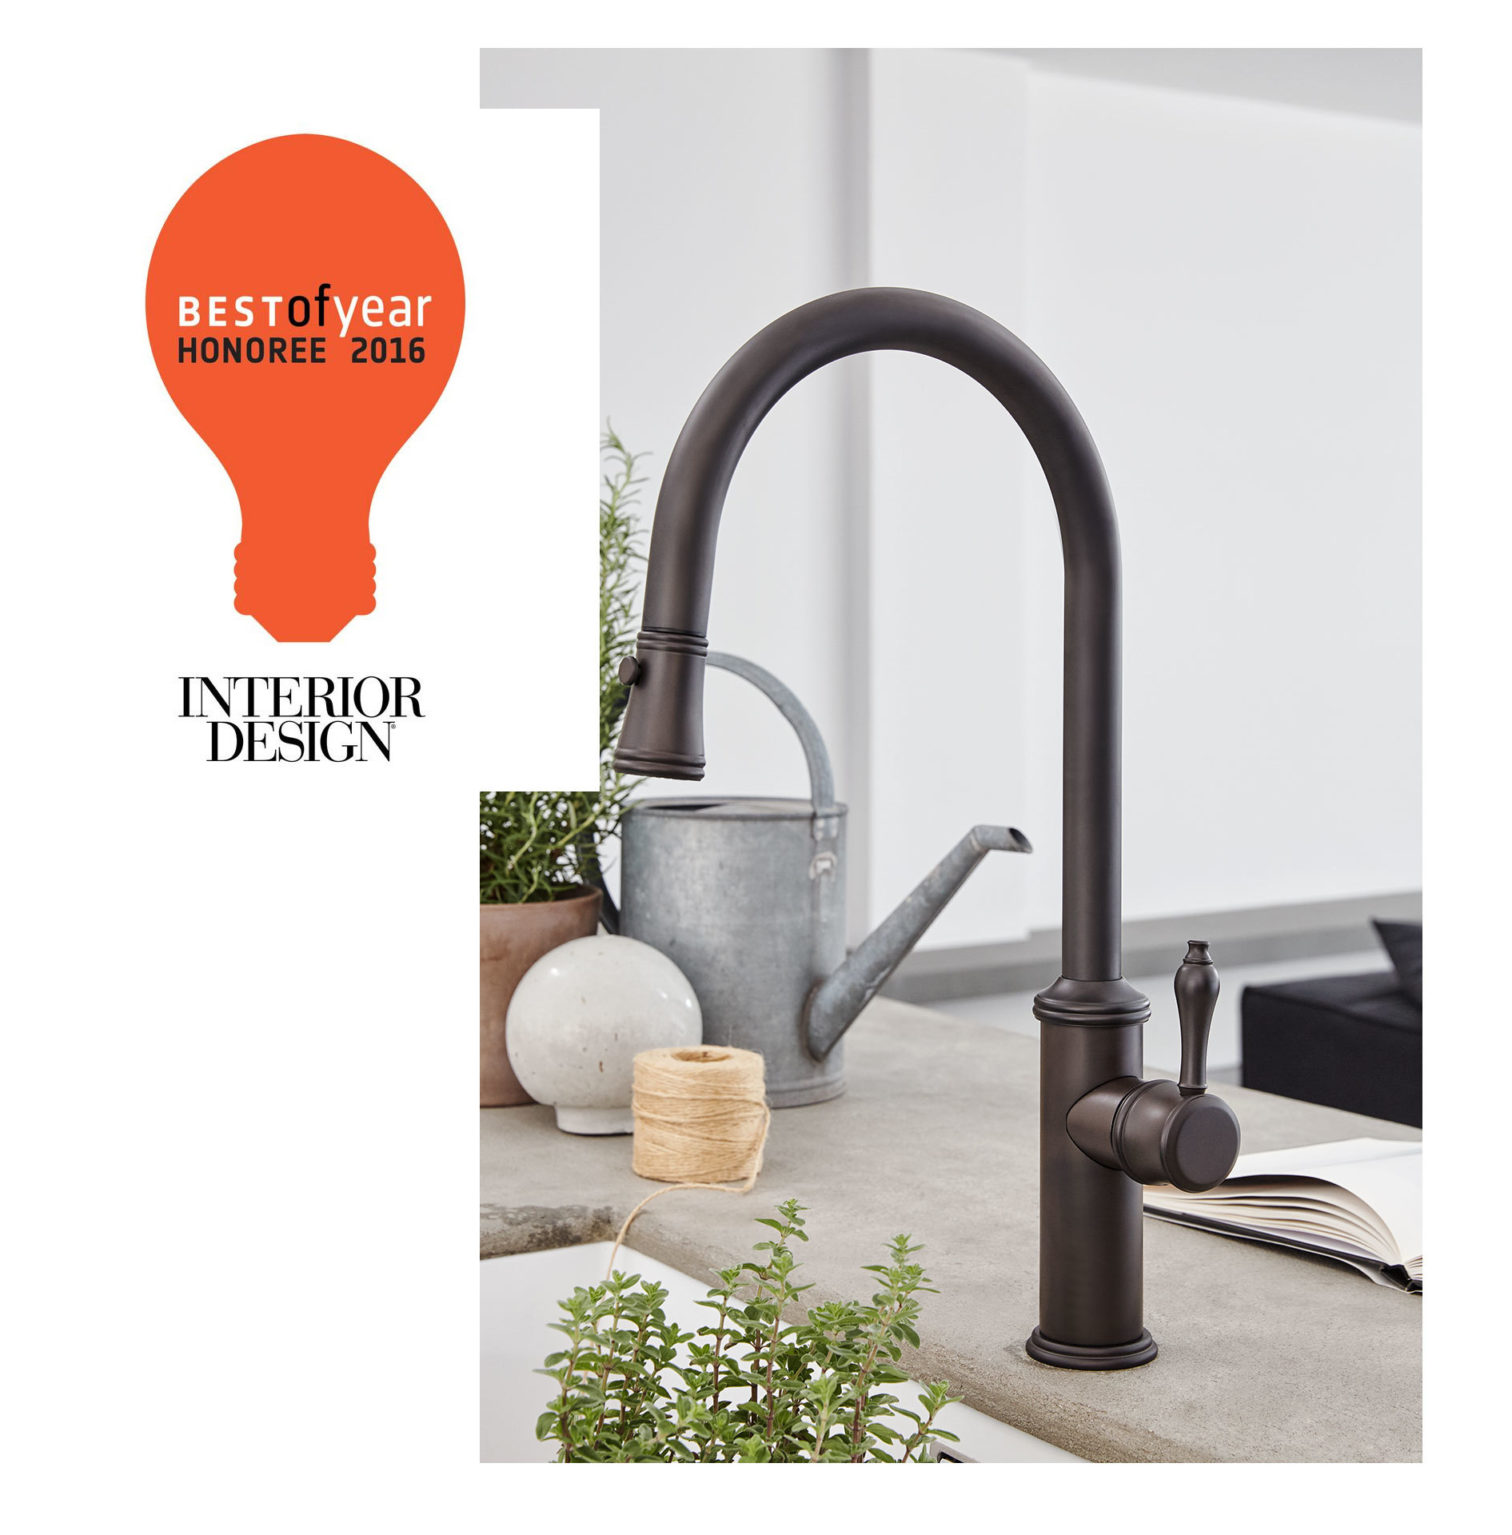 Interior Design Best of Year 2016 Honoree logo overlay on Davoli pull down kitchen faucet